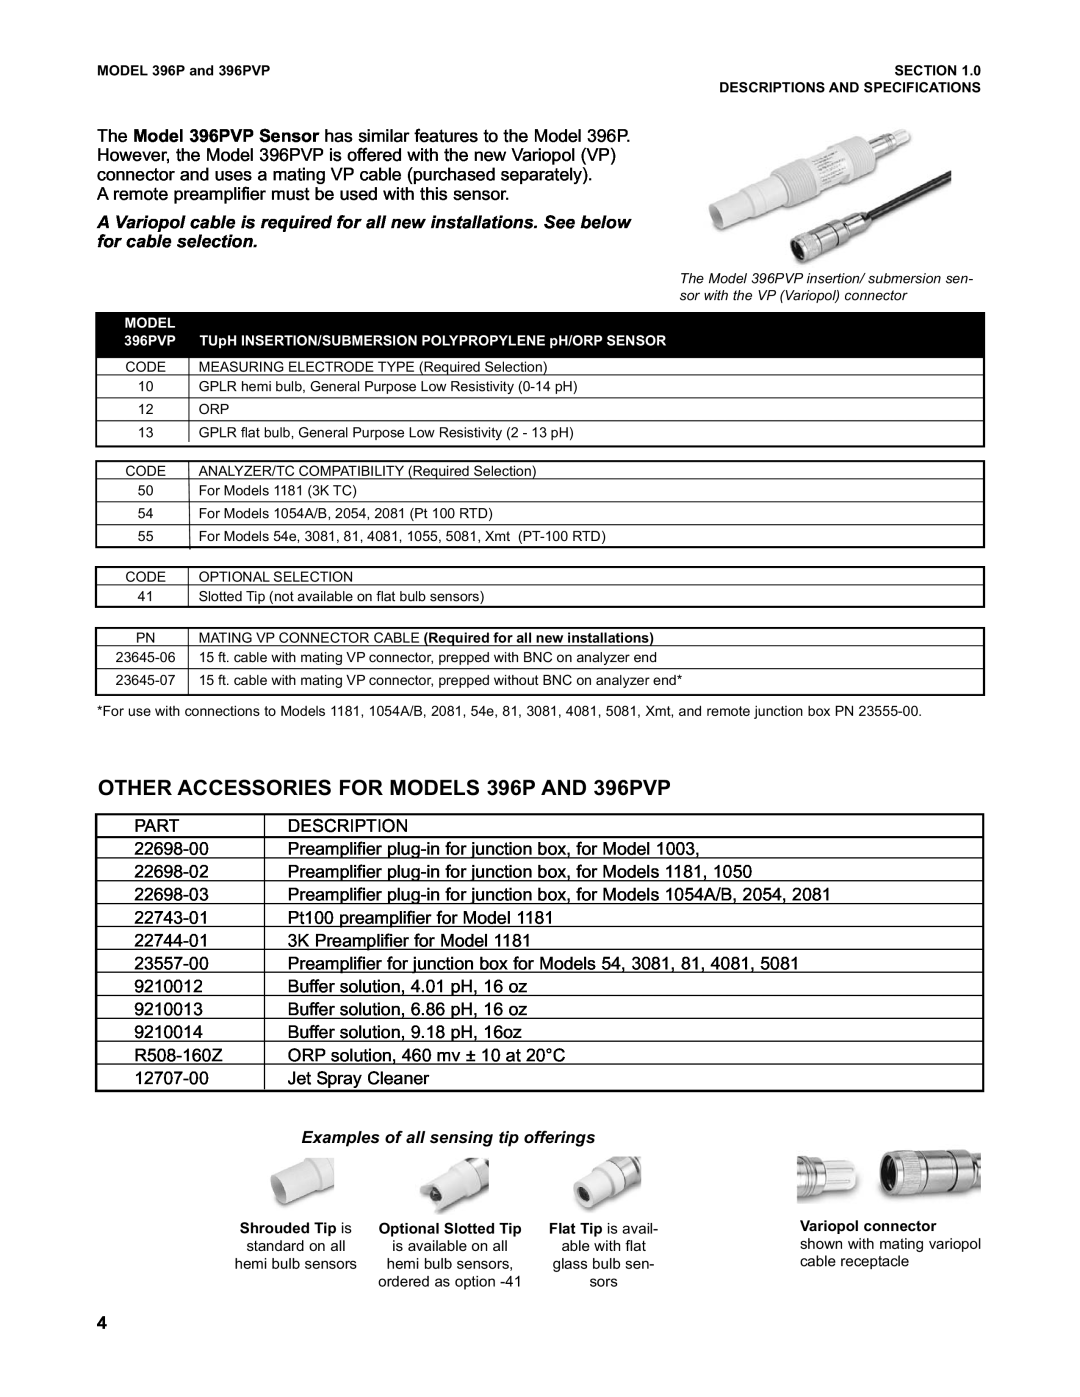 Emerson Process Management OTHER ACCESSORIES FOR MODELS 396P AND 396PVP, Examples of all sensing tip offerings 